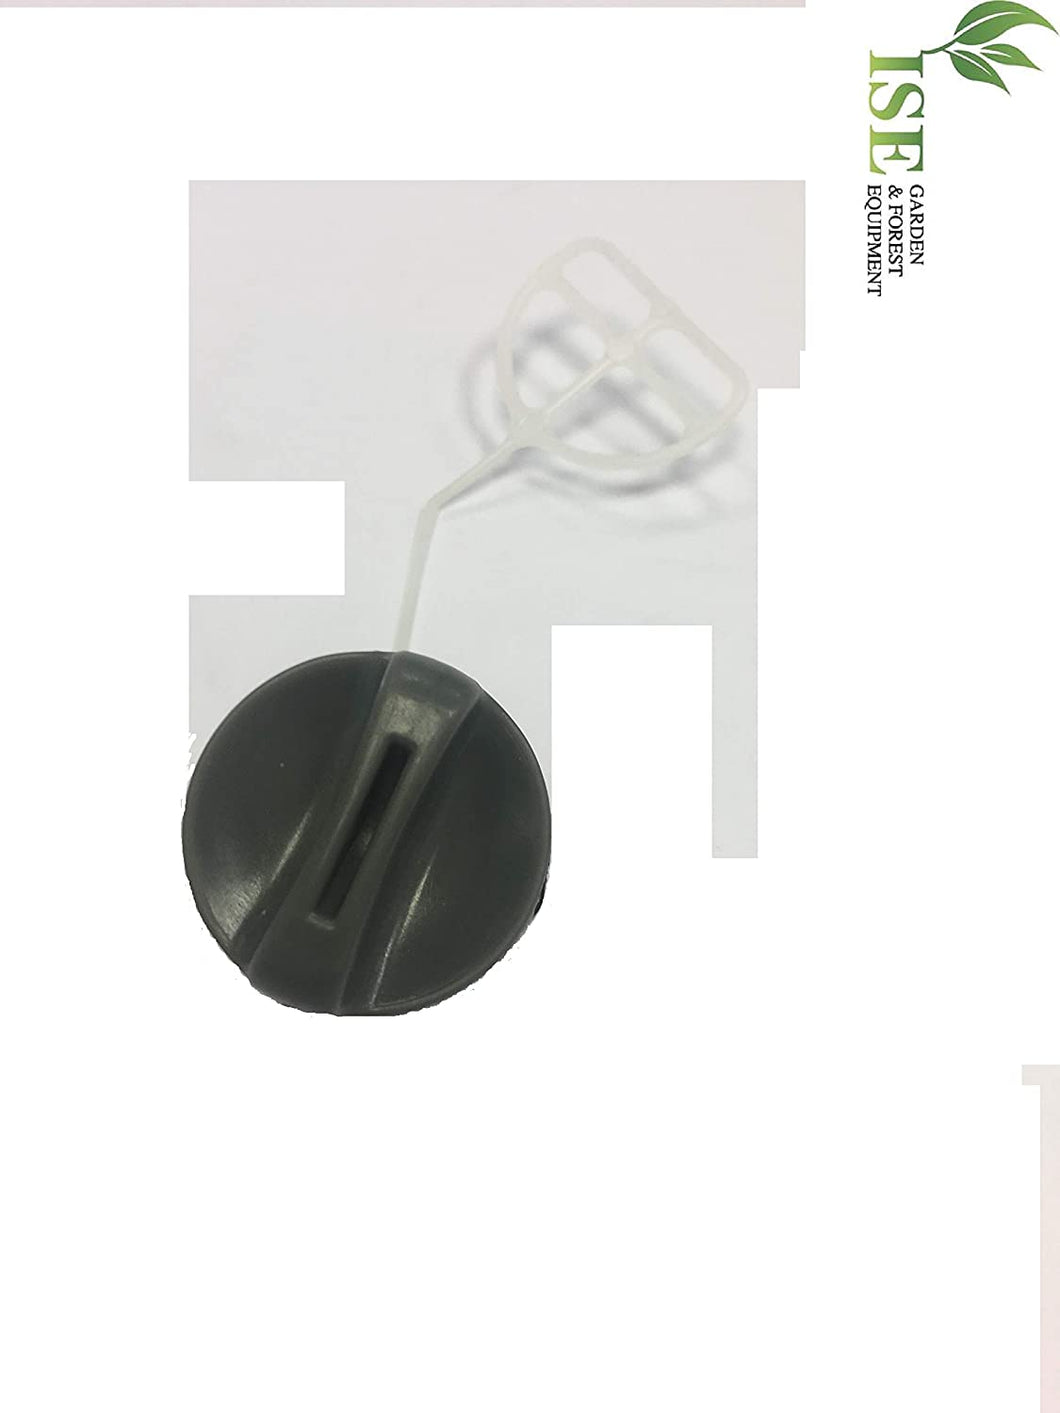 ISE Replacement Fuel Tank Cap for Husqvarna 365 Replaces Part Numbers: 537215202, 537215207